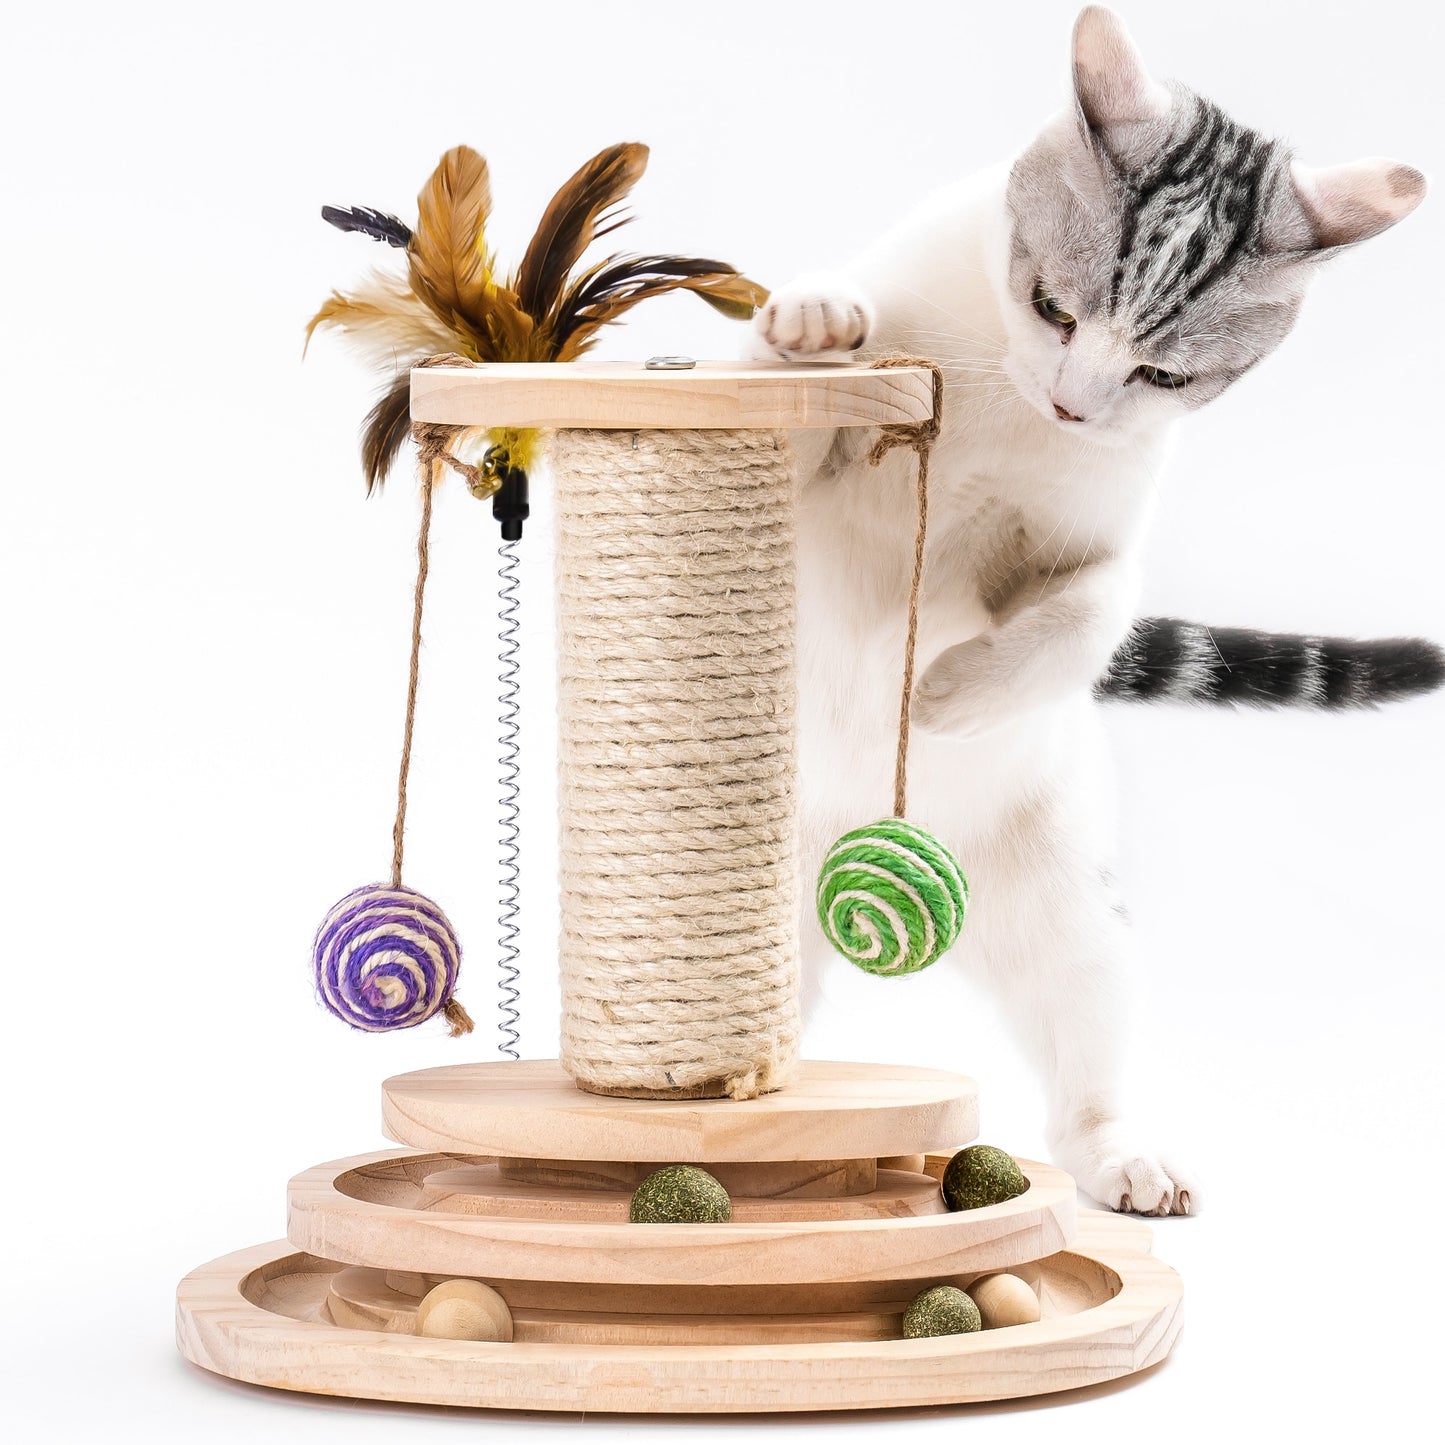 Mewoofun Cat Scratcher Pole Two-Layer Tier Track Ball and Two Sisal Balls Fun Interactive Cat Toy with Feather Bell WP037 - thepetsupplyhaven